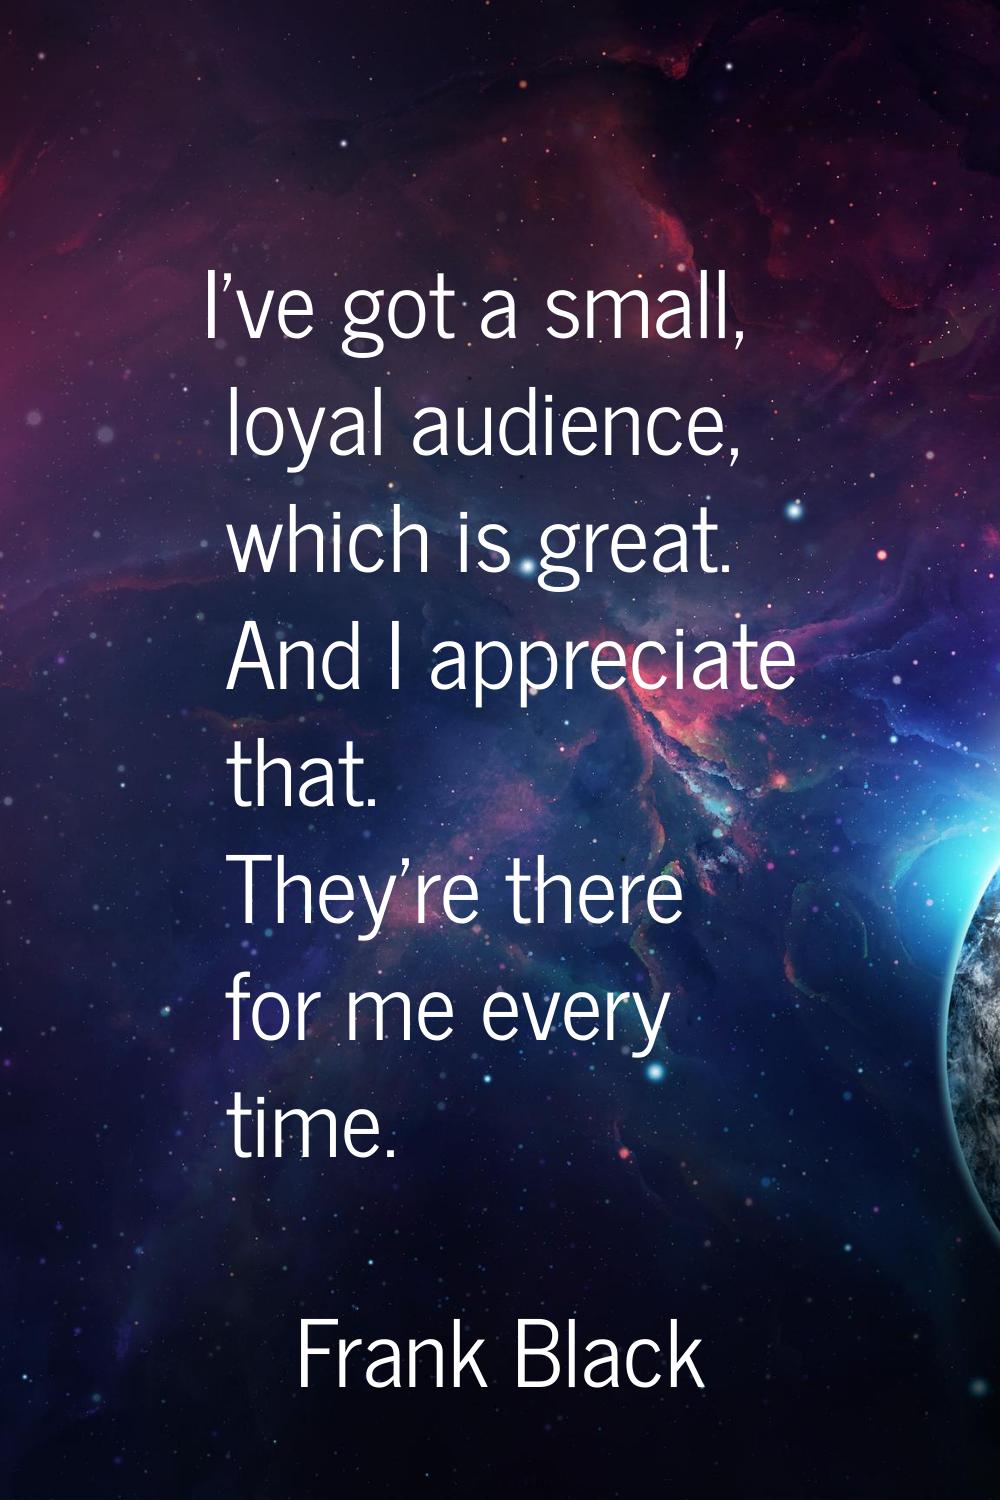 I've got a small, loyal audience, which is great. And I appreciate that. They're there for me every